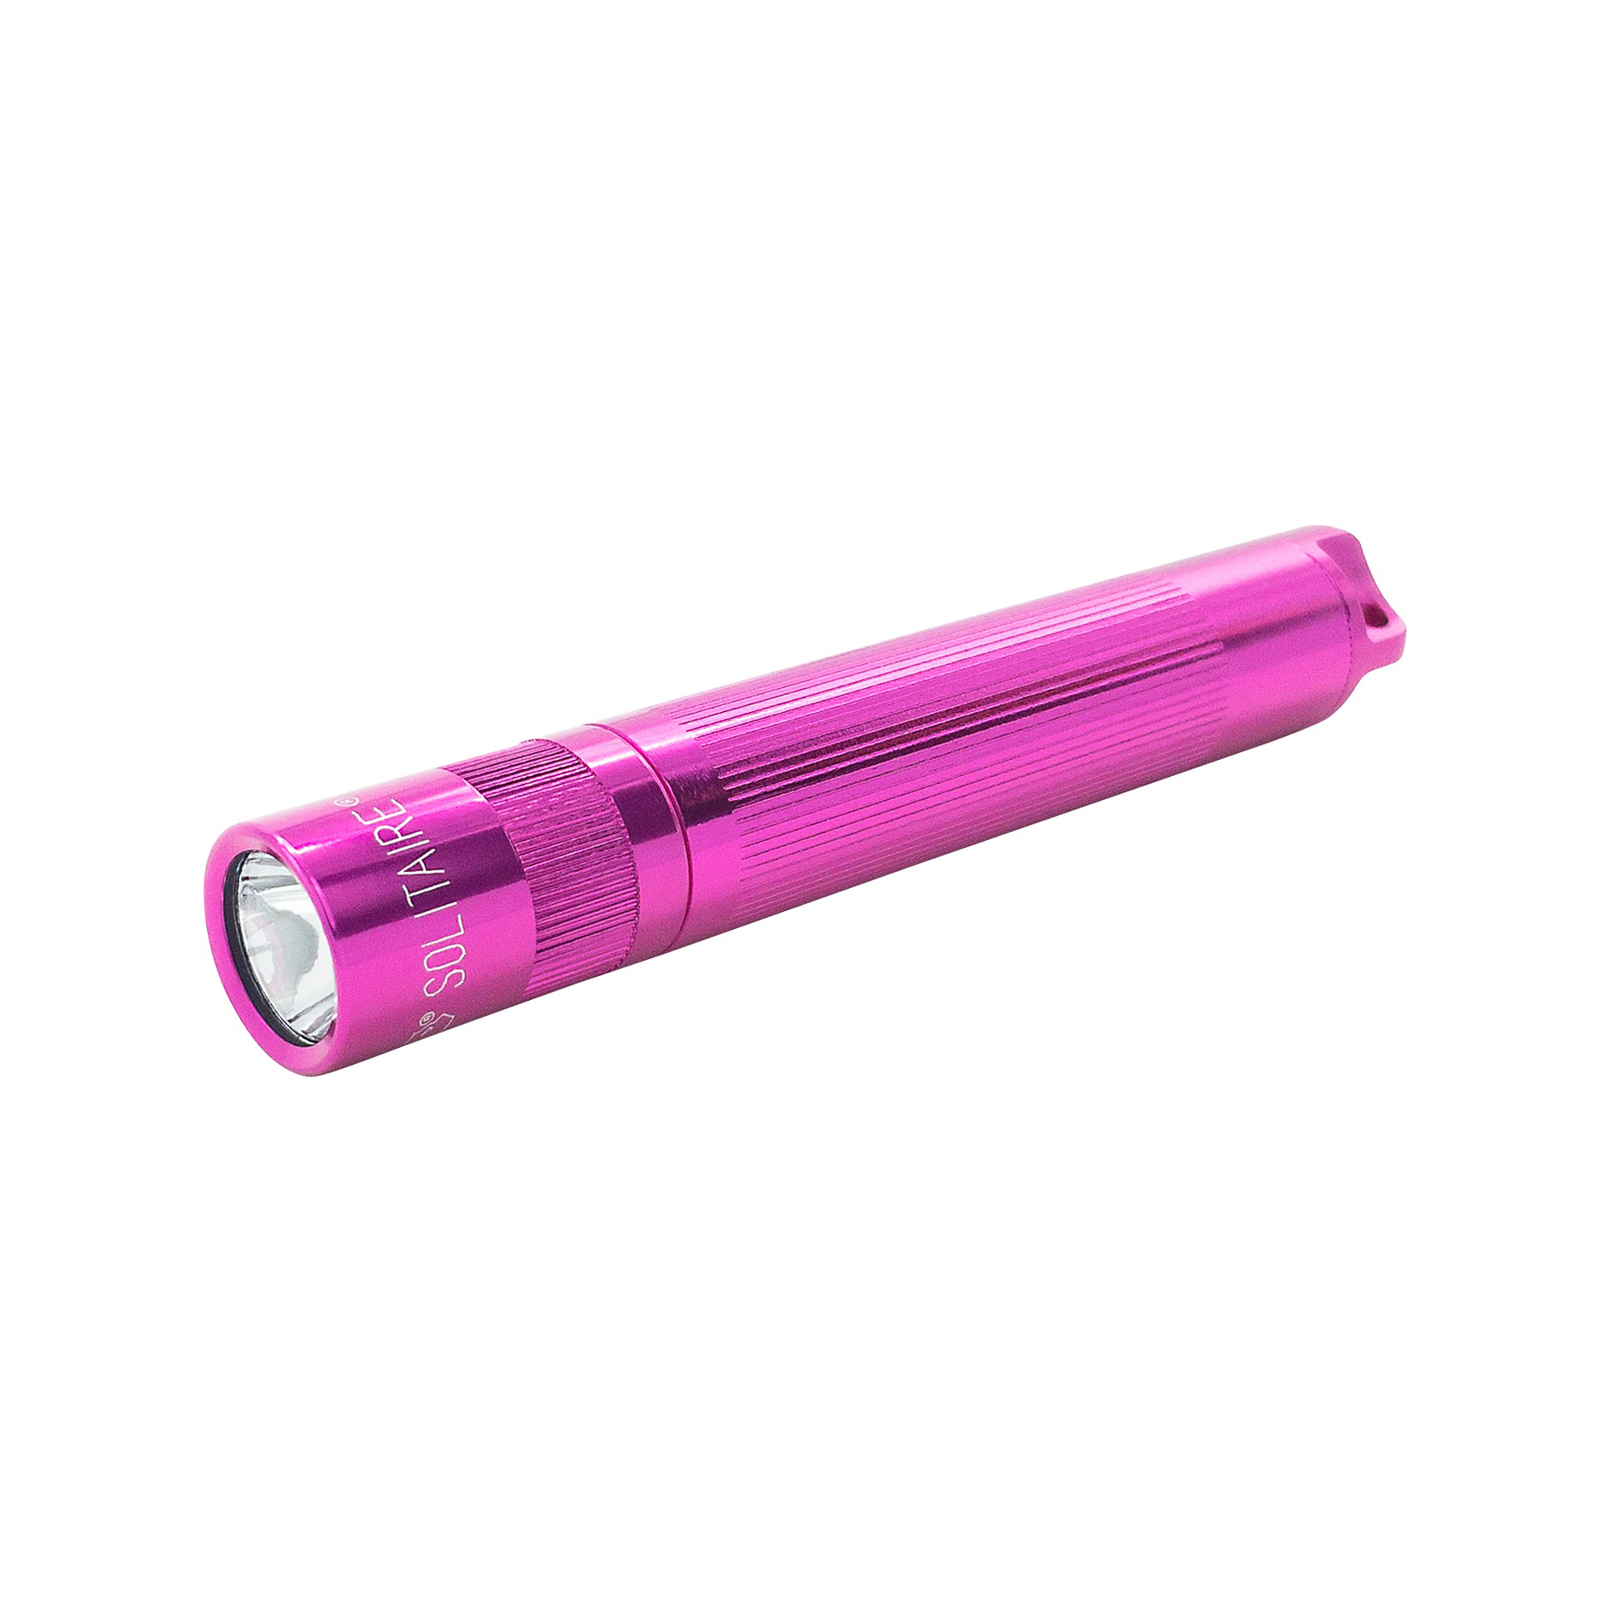 Maglite LED-lommelykt Solitaire, 1-cellet AAA, rosa